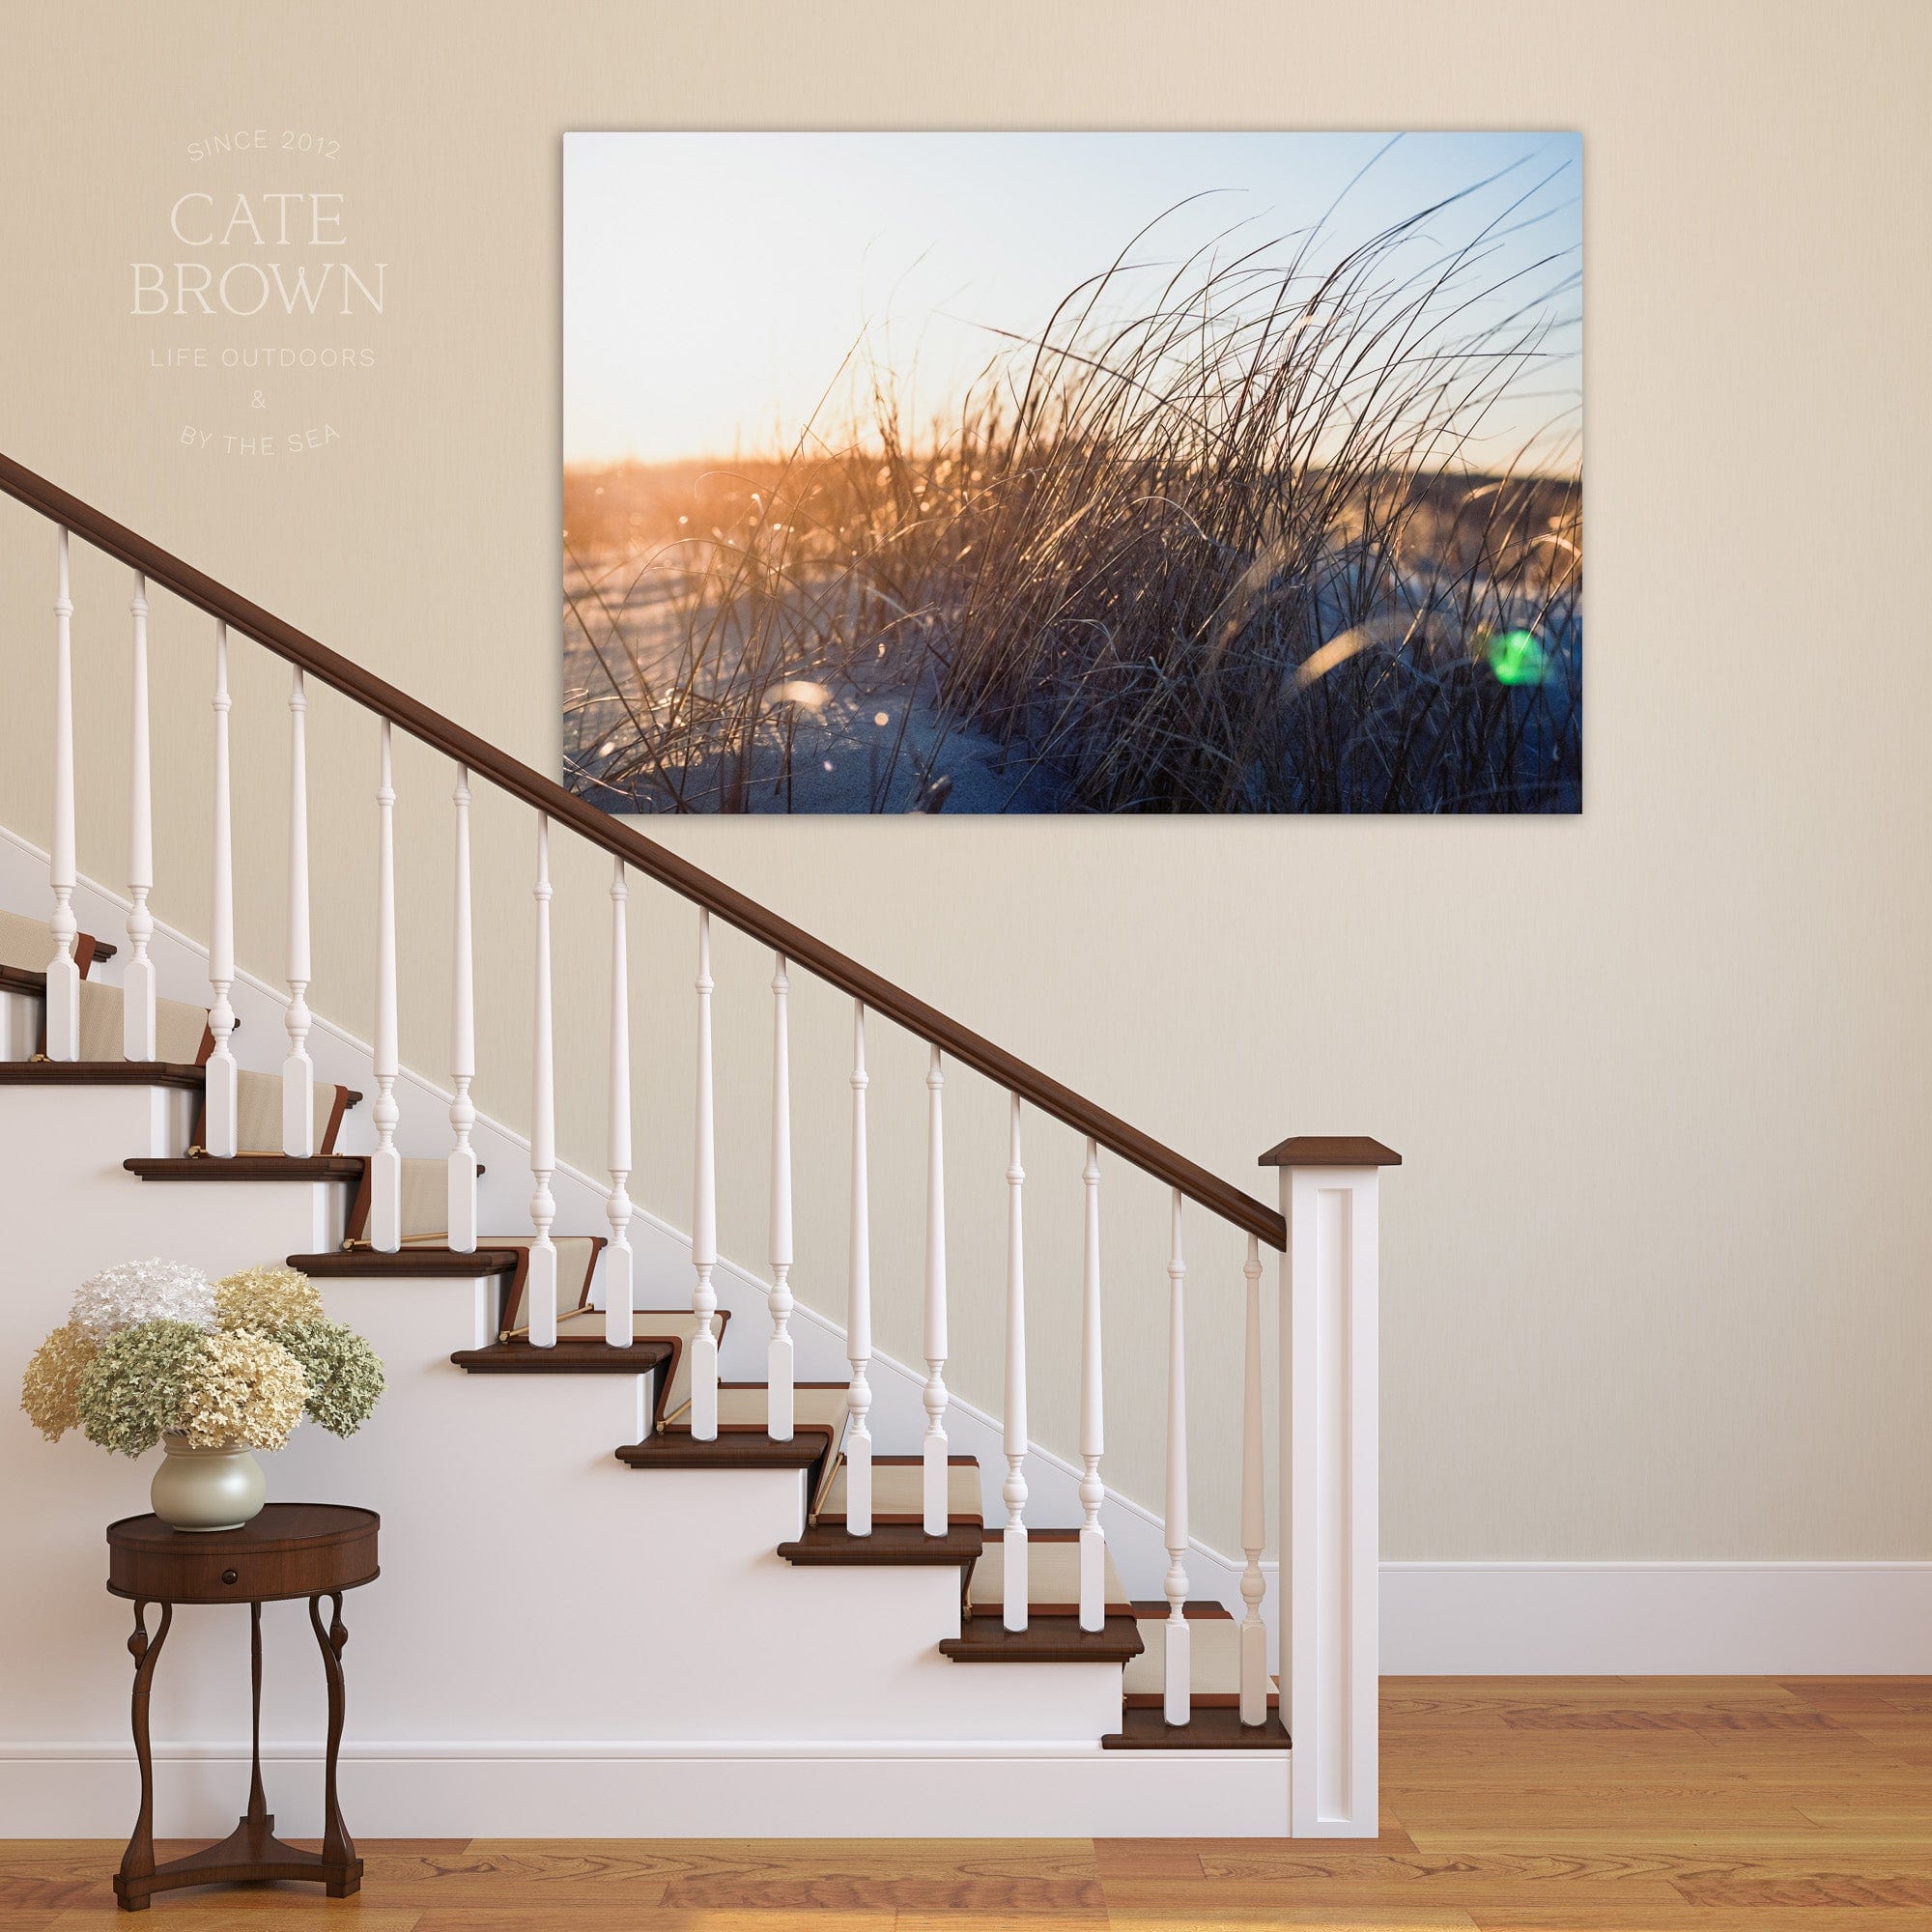 Cate Brown Photo Canvas / 16"x24" / None (Print Only) Beach Grass in Gold #1  //  Film Photography Made to Order Ocean Fine Art